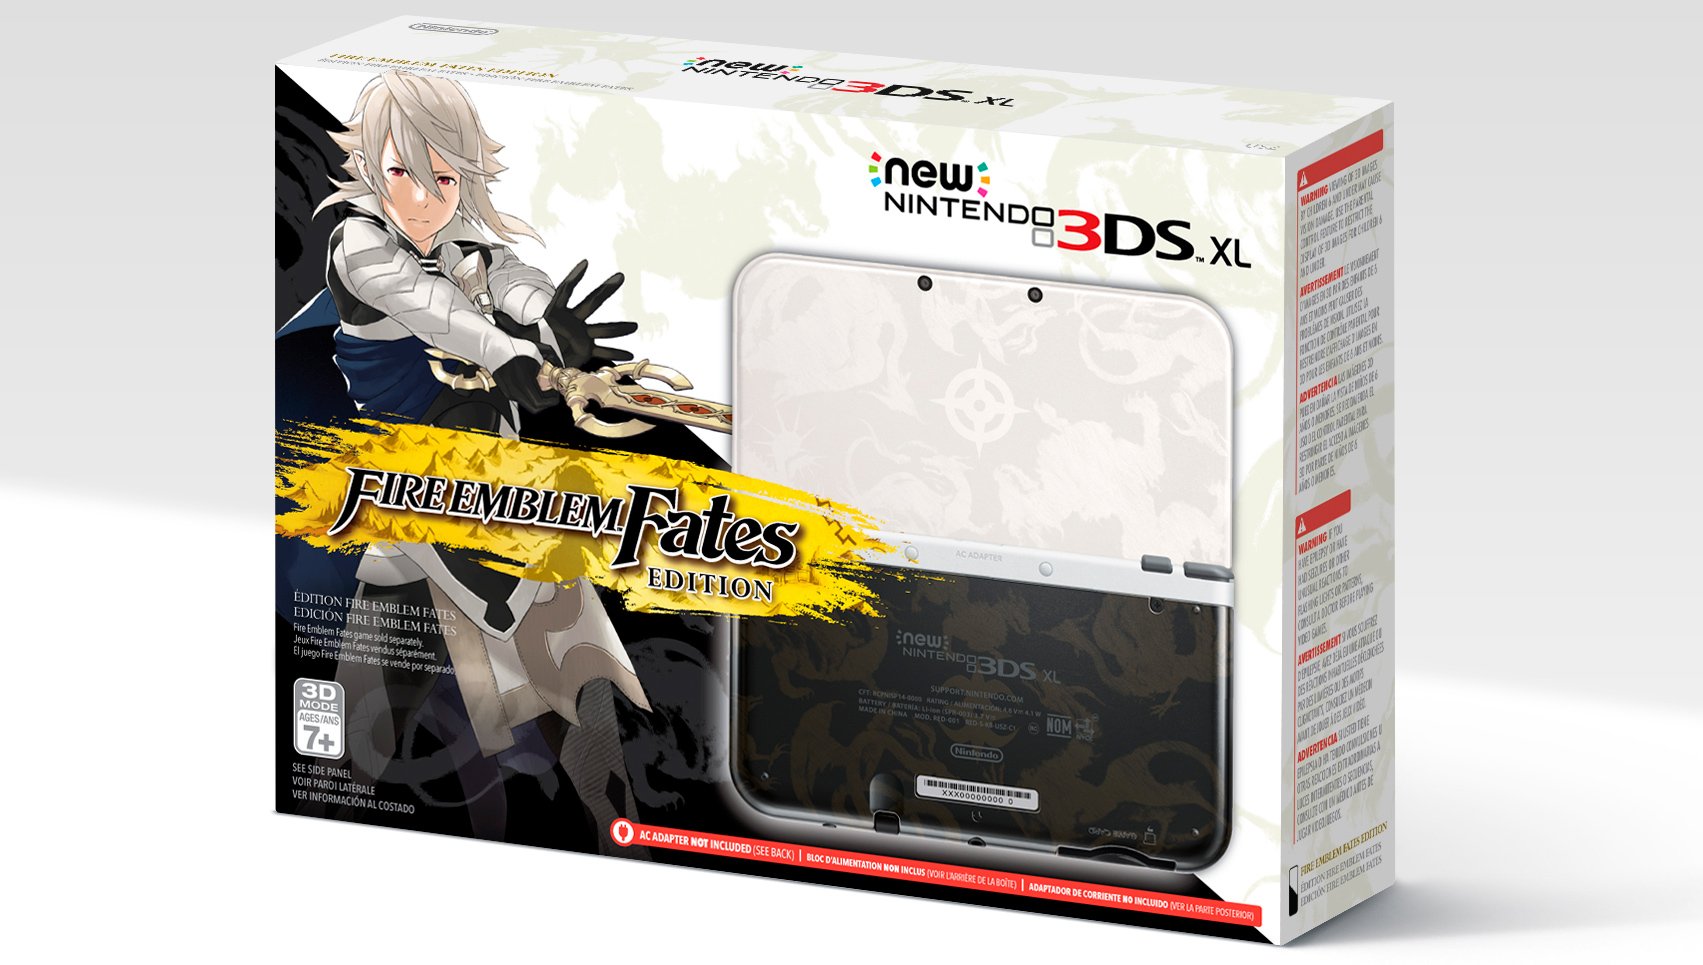 Nintendo 3ds XL Limited Edition. Nintendo New 3ds XL Limited. New Nintendo 3ds Limited Edition. Nintendo 3ds XL Fire Emblem. Nintendo fire